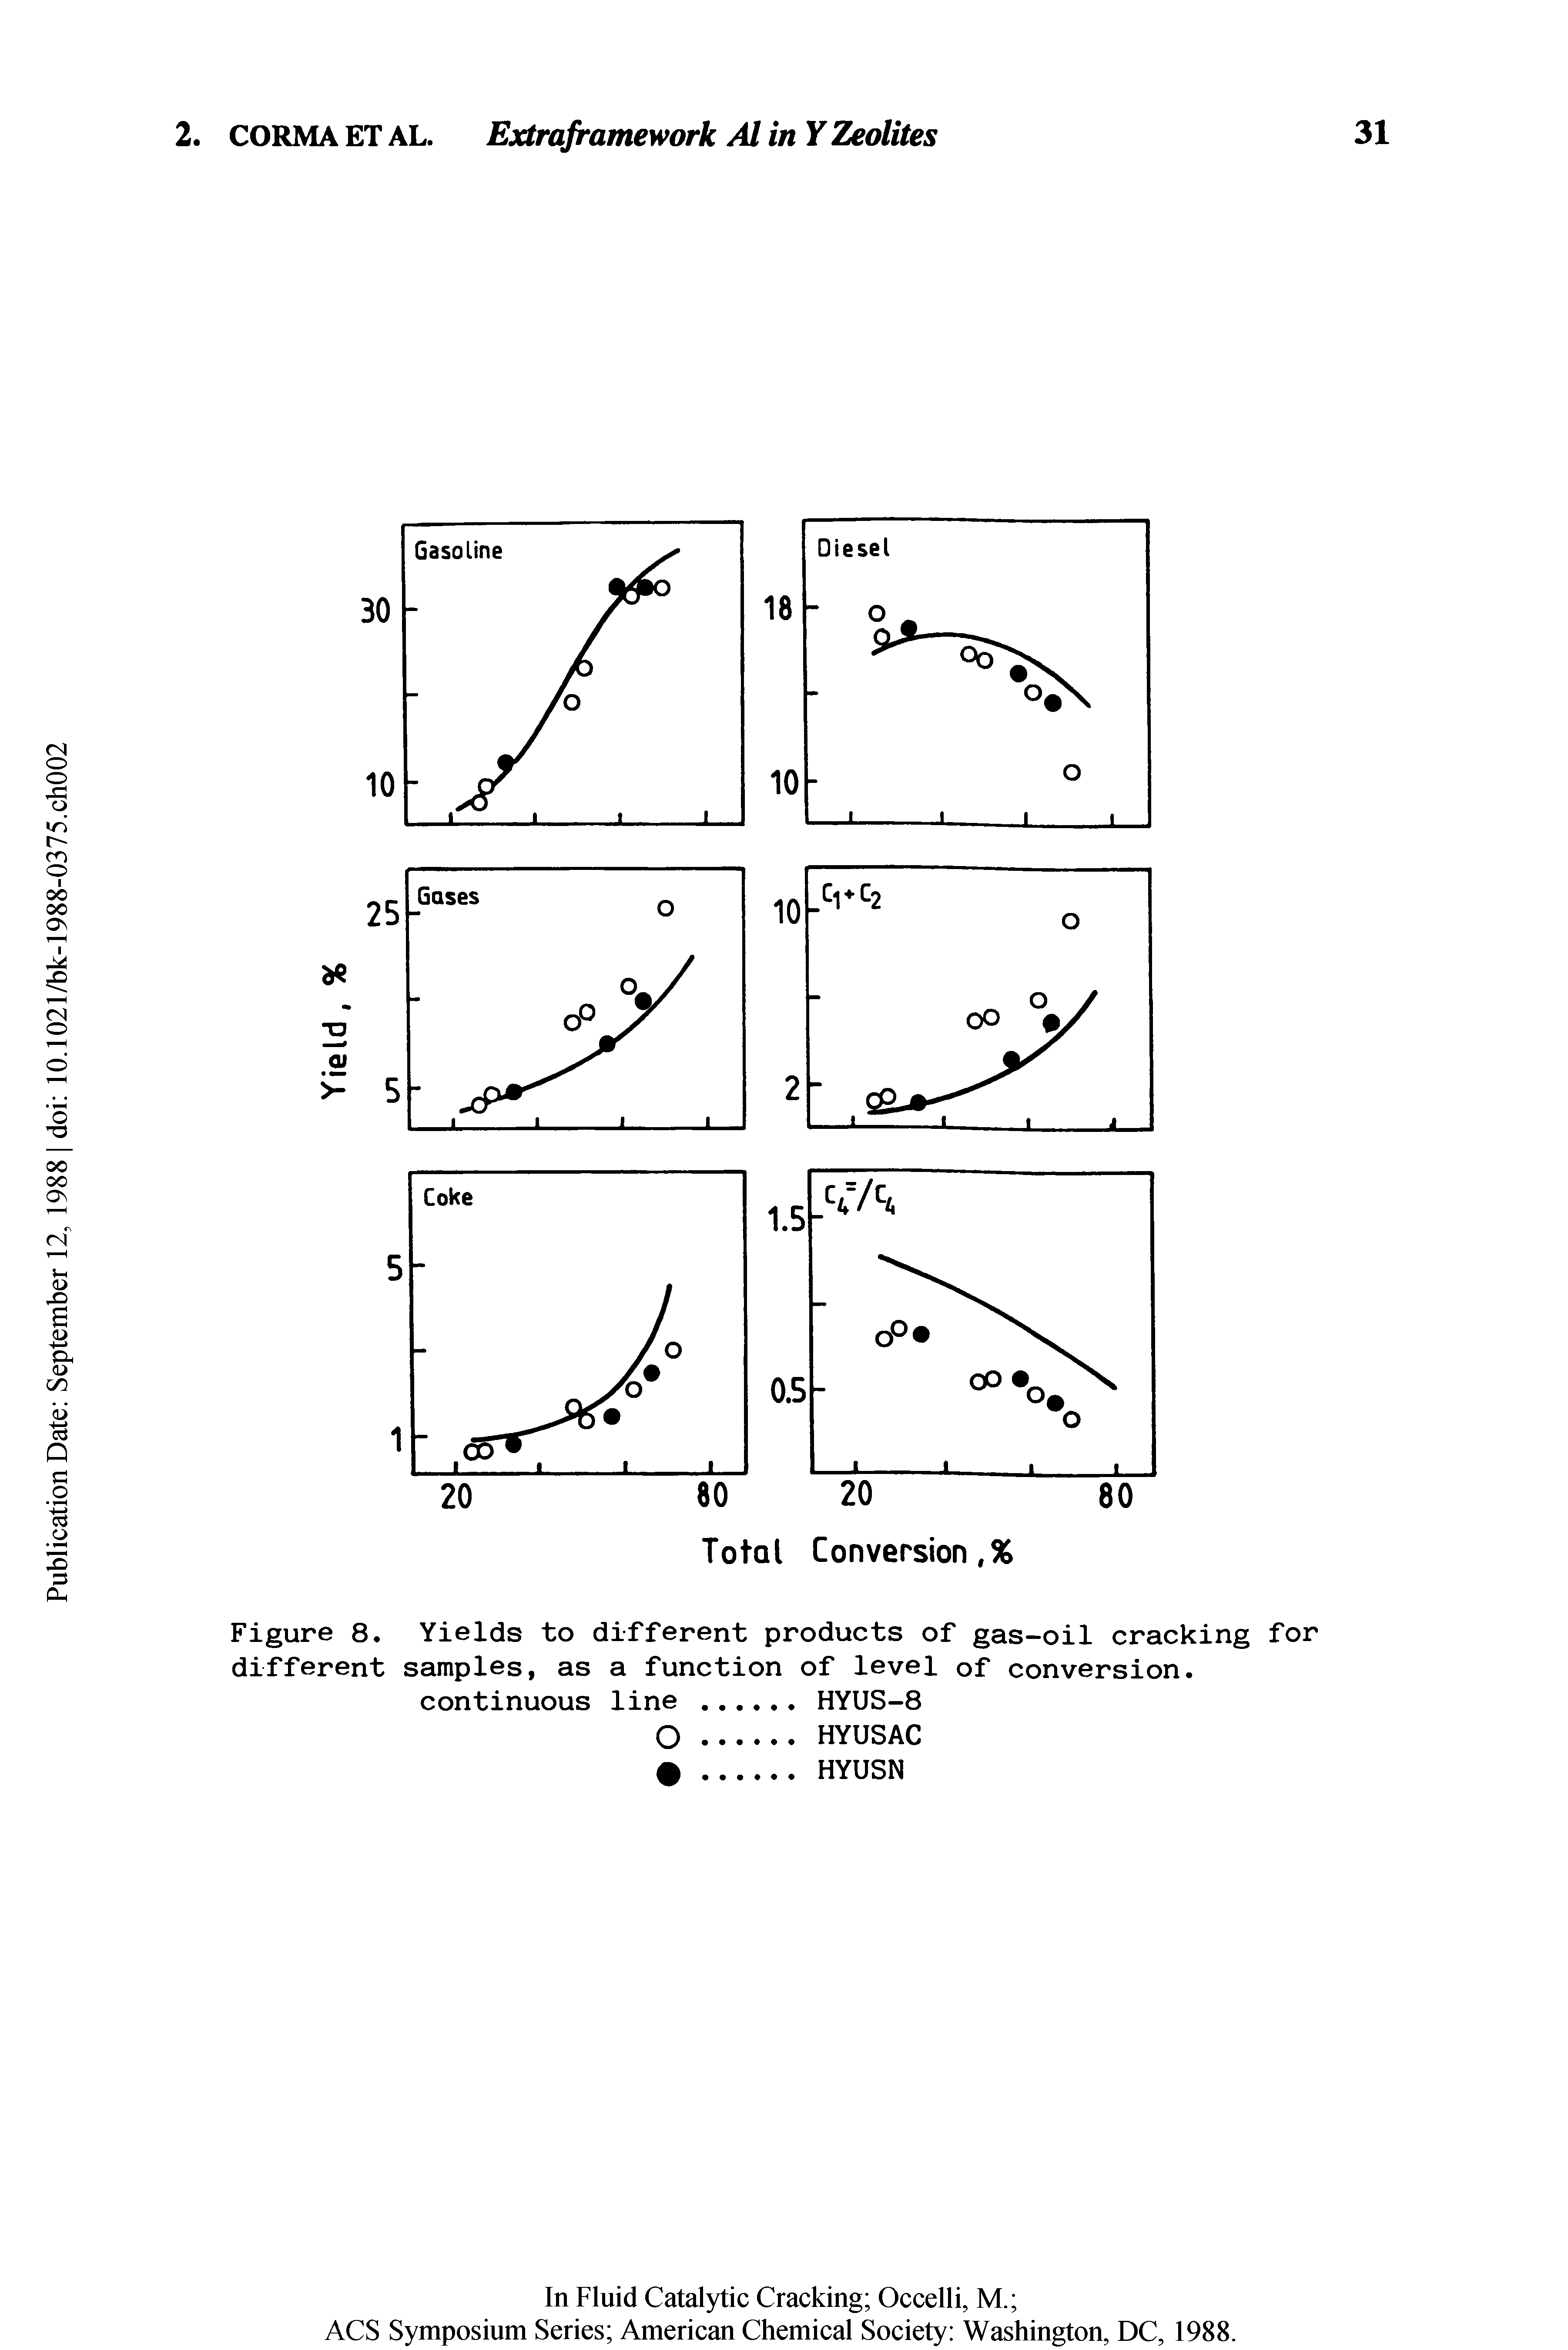 Figure 8. Yields to different products of gas-oil cracking for different samples, as a function of level of conversion.